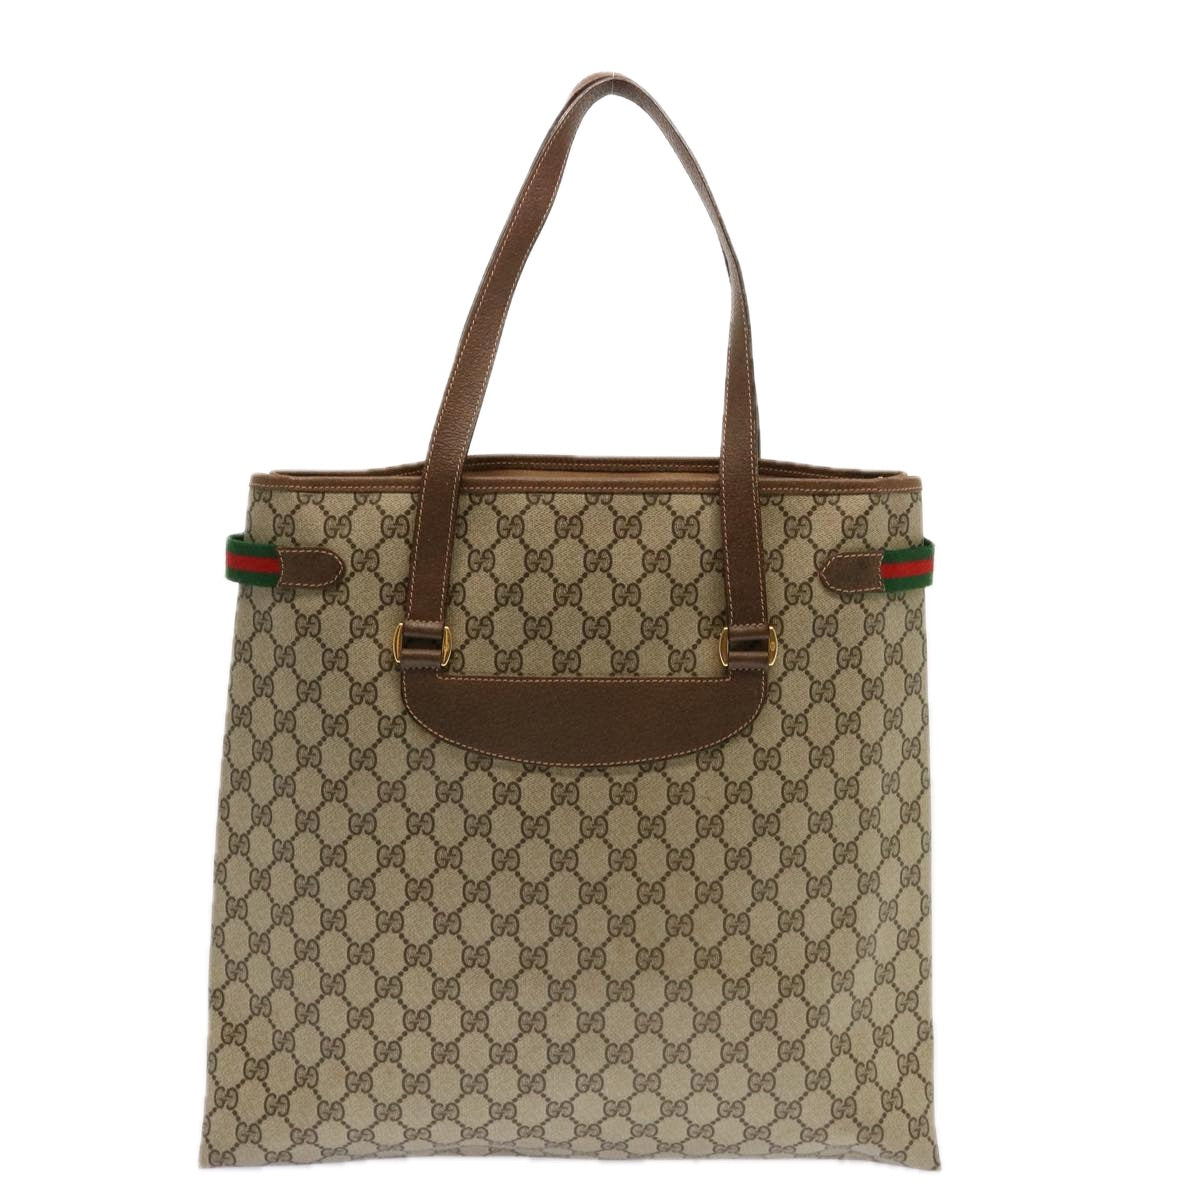 GUCCI GG Supreme Web Sherry Line Tote Bag PVC Beige Red 39 02 091 Auth ep3766 - 0